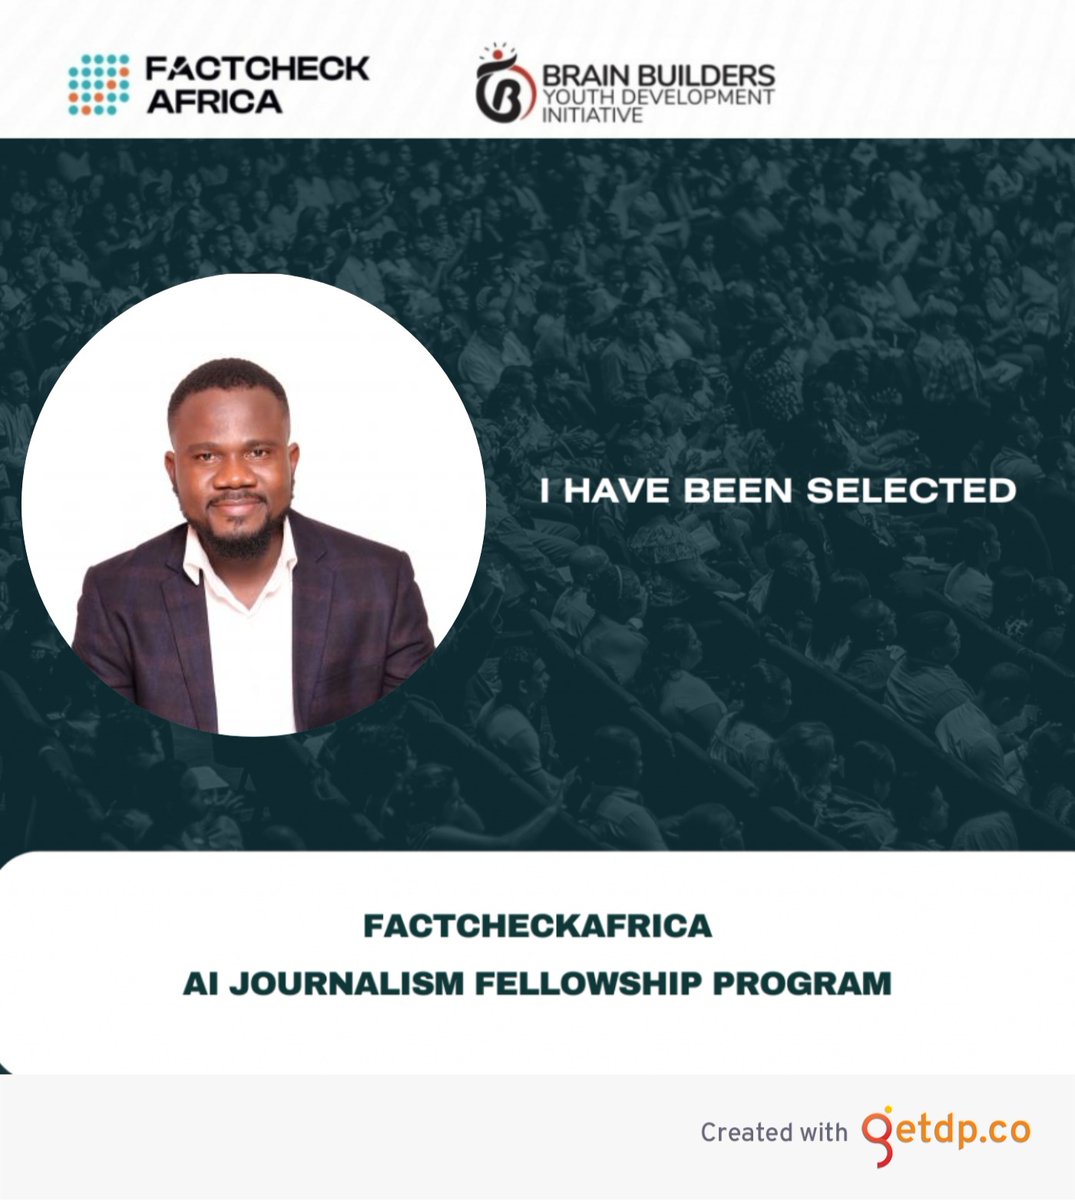 Thrilled to announce that I've been accepted into the FactCheckAfrica AI Journalism Fellowship Program! Excited to explore the world of AI in journalism. @FactC_Africa @BrainBuilders01
#AIJournalismFellowship  #JournalismAI #MediaInnovation #FactCheckAfrica.